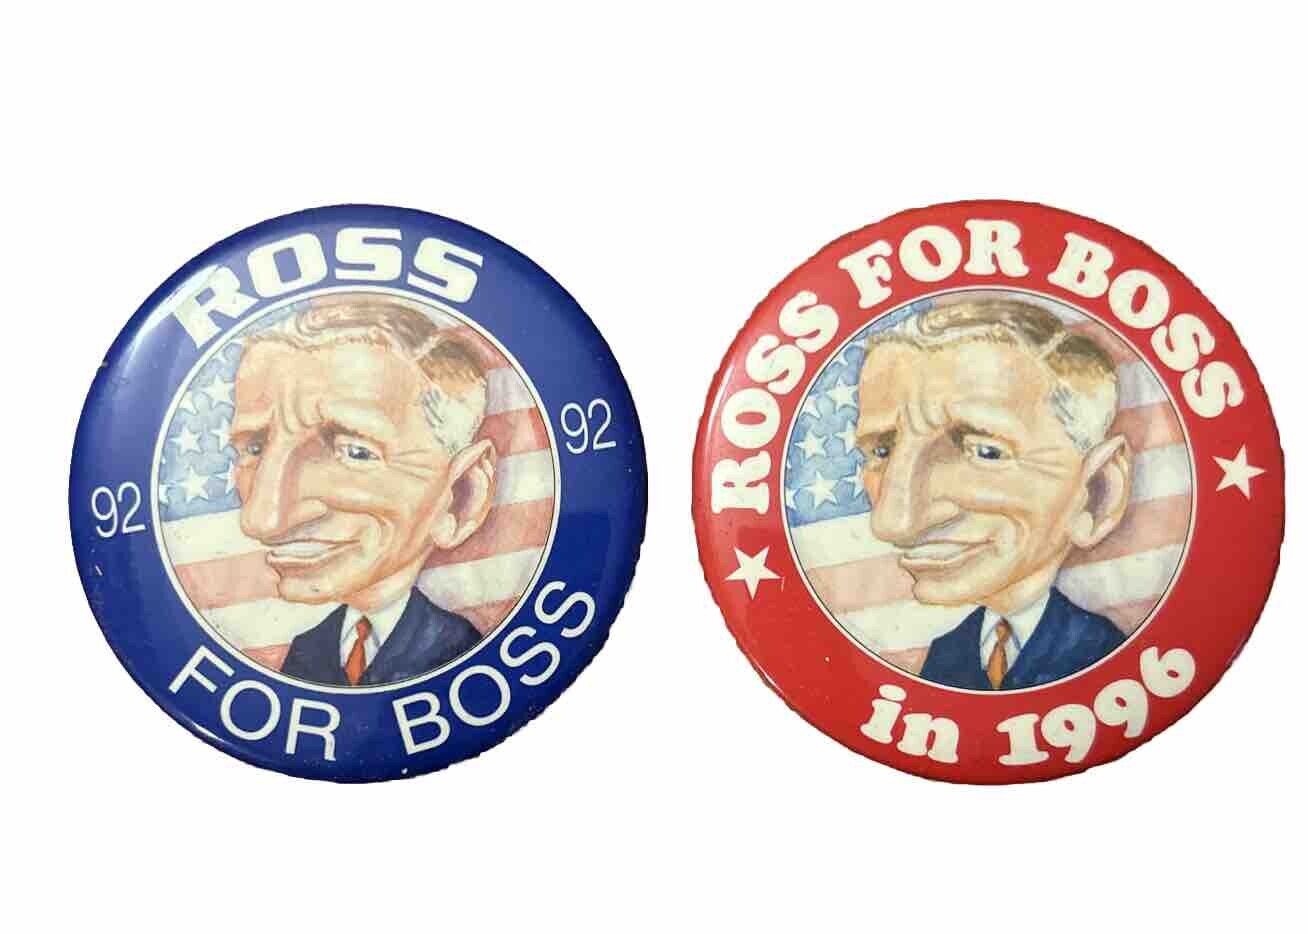 ROSS PEROT 3” Political Campaign Pins Buttons 1992 /1996 “ROSS THE BOSS” Lot